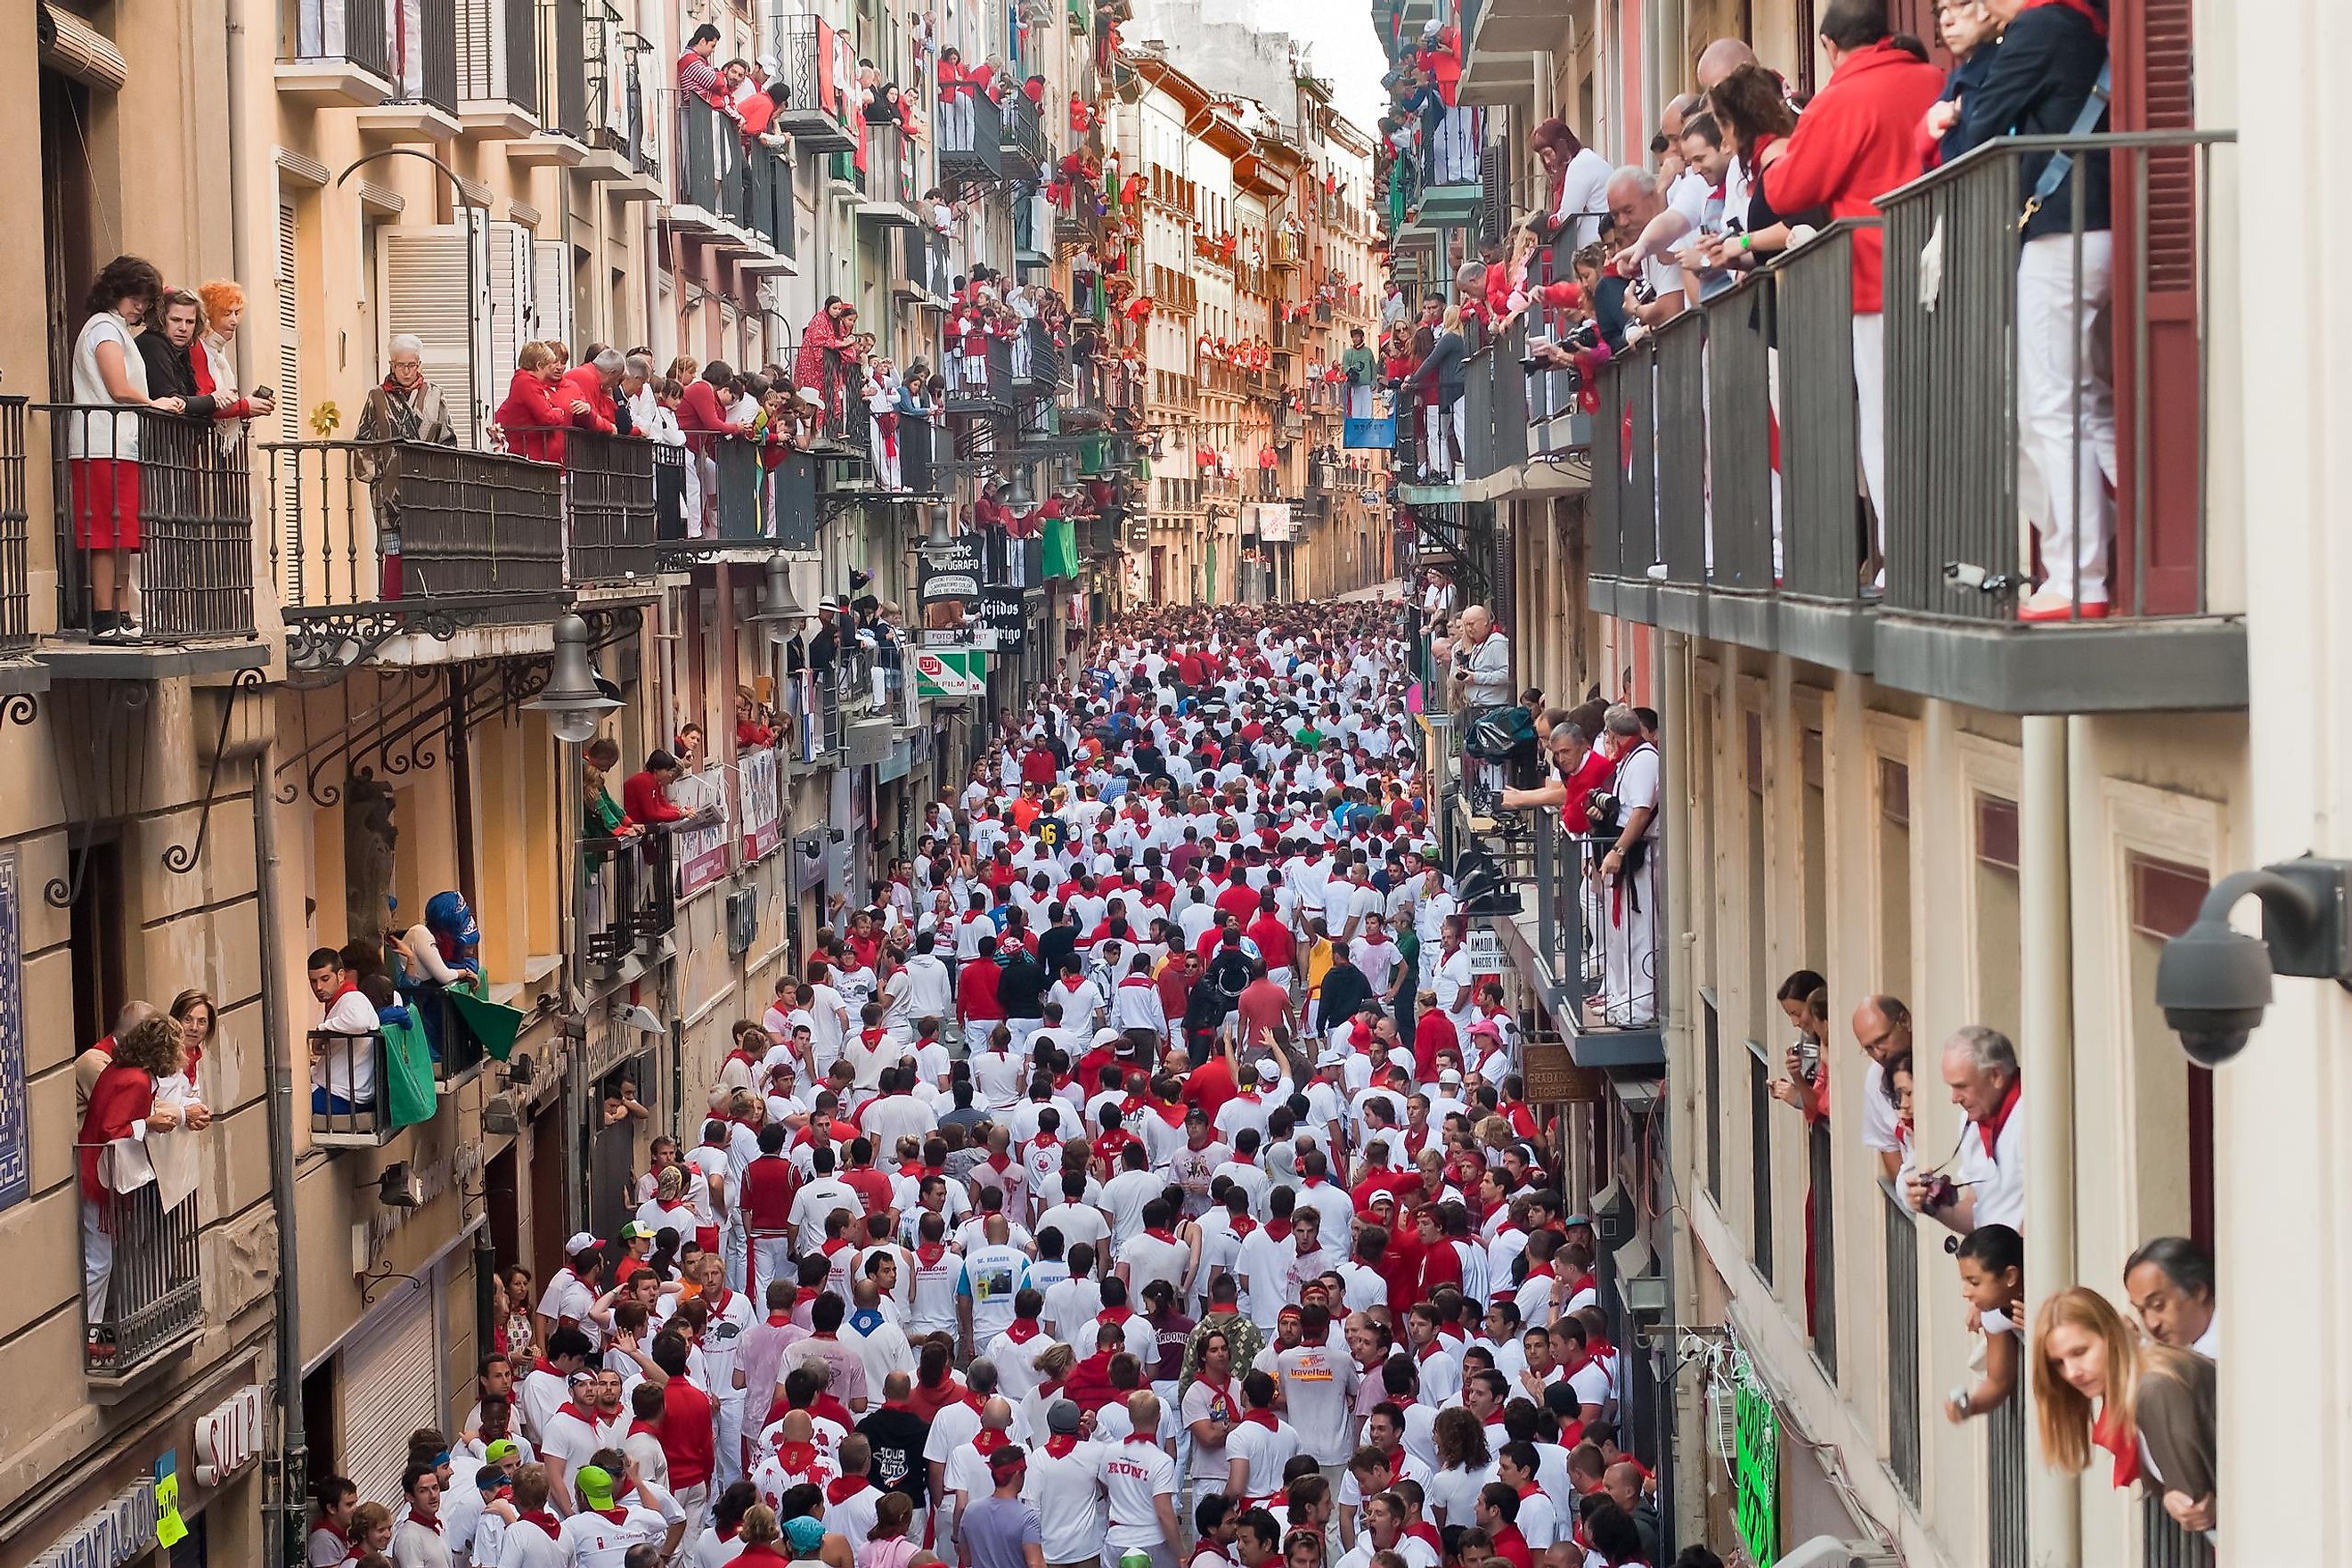 Calle Estafeta is packed with people dressed in white and red, waiting for the morning bull run to kick off. Part of the annual San Fermin Festival. Photo: Migel